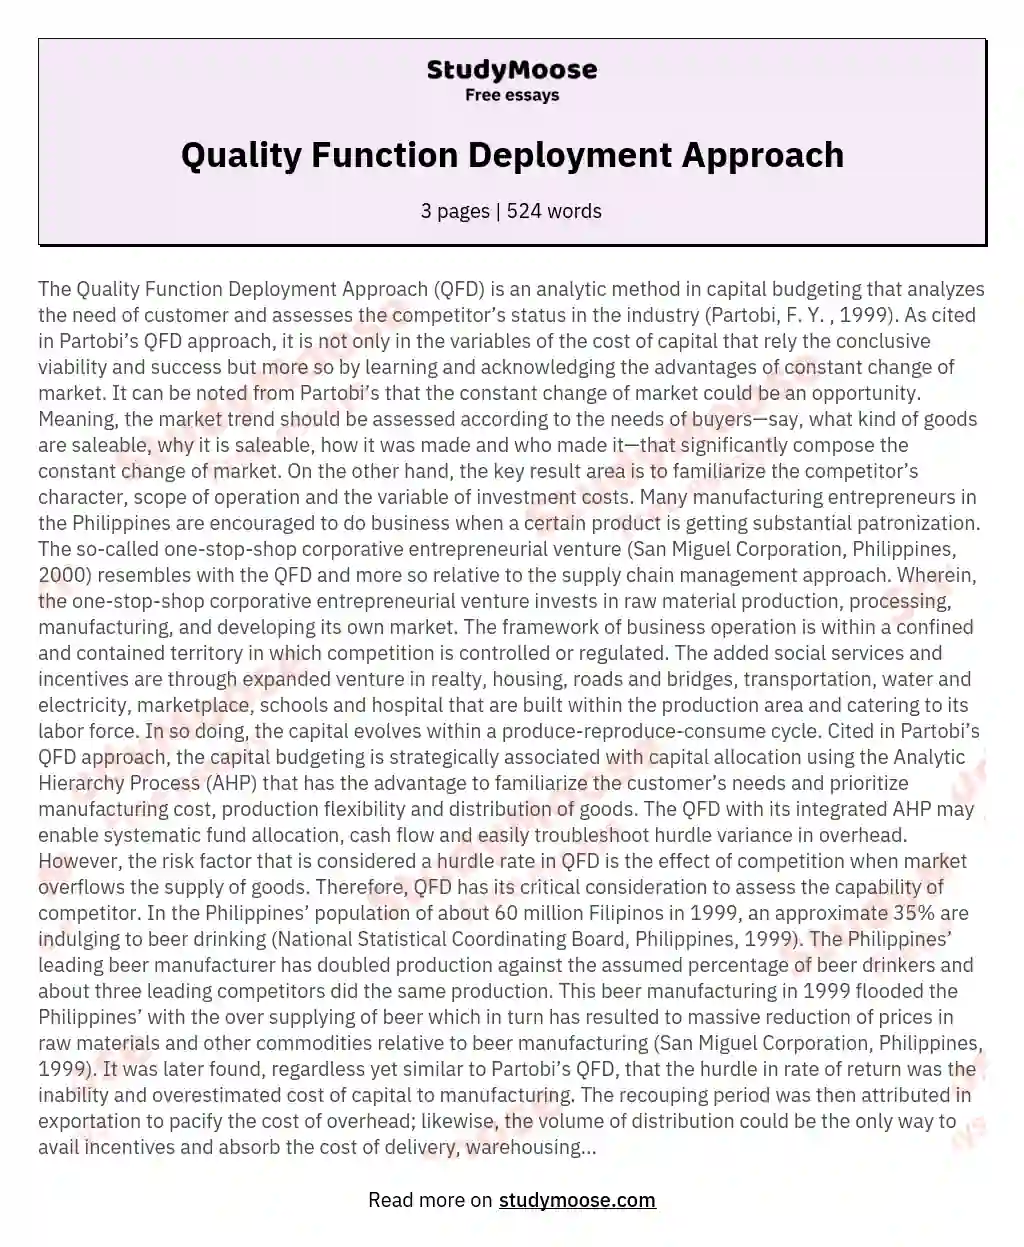 Quality Function Deployment Approach essay